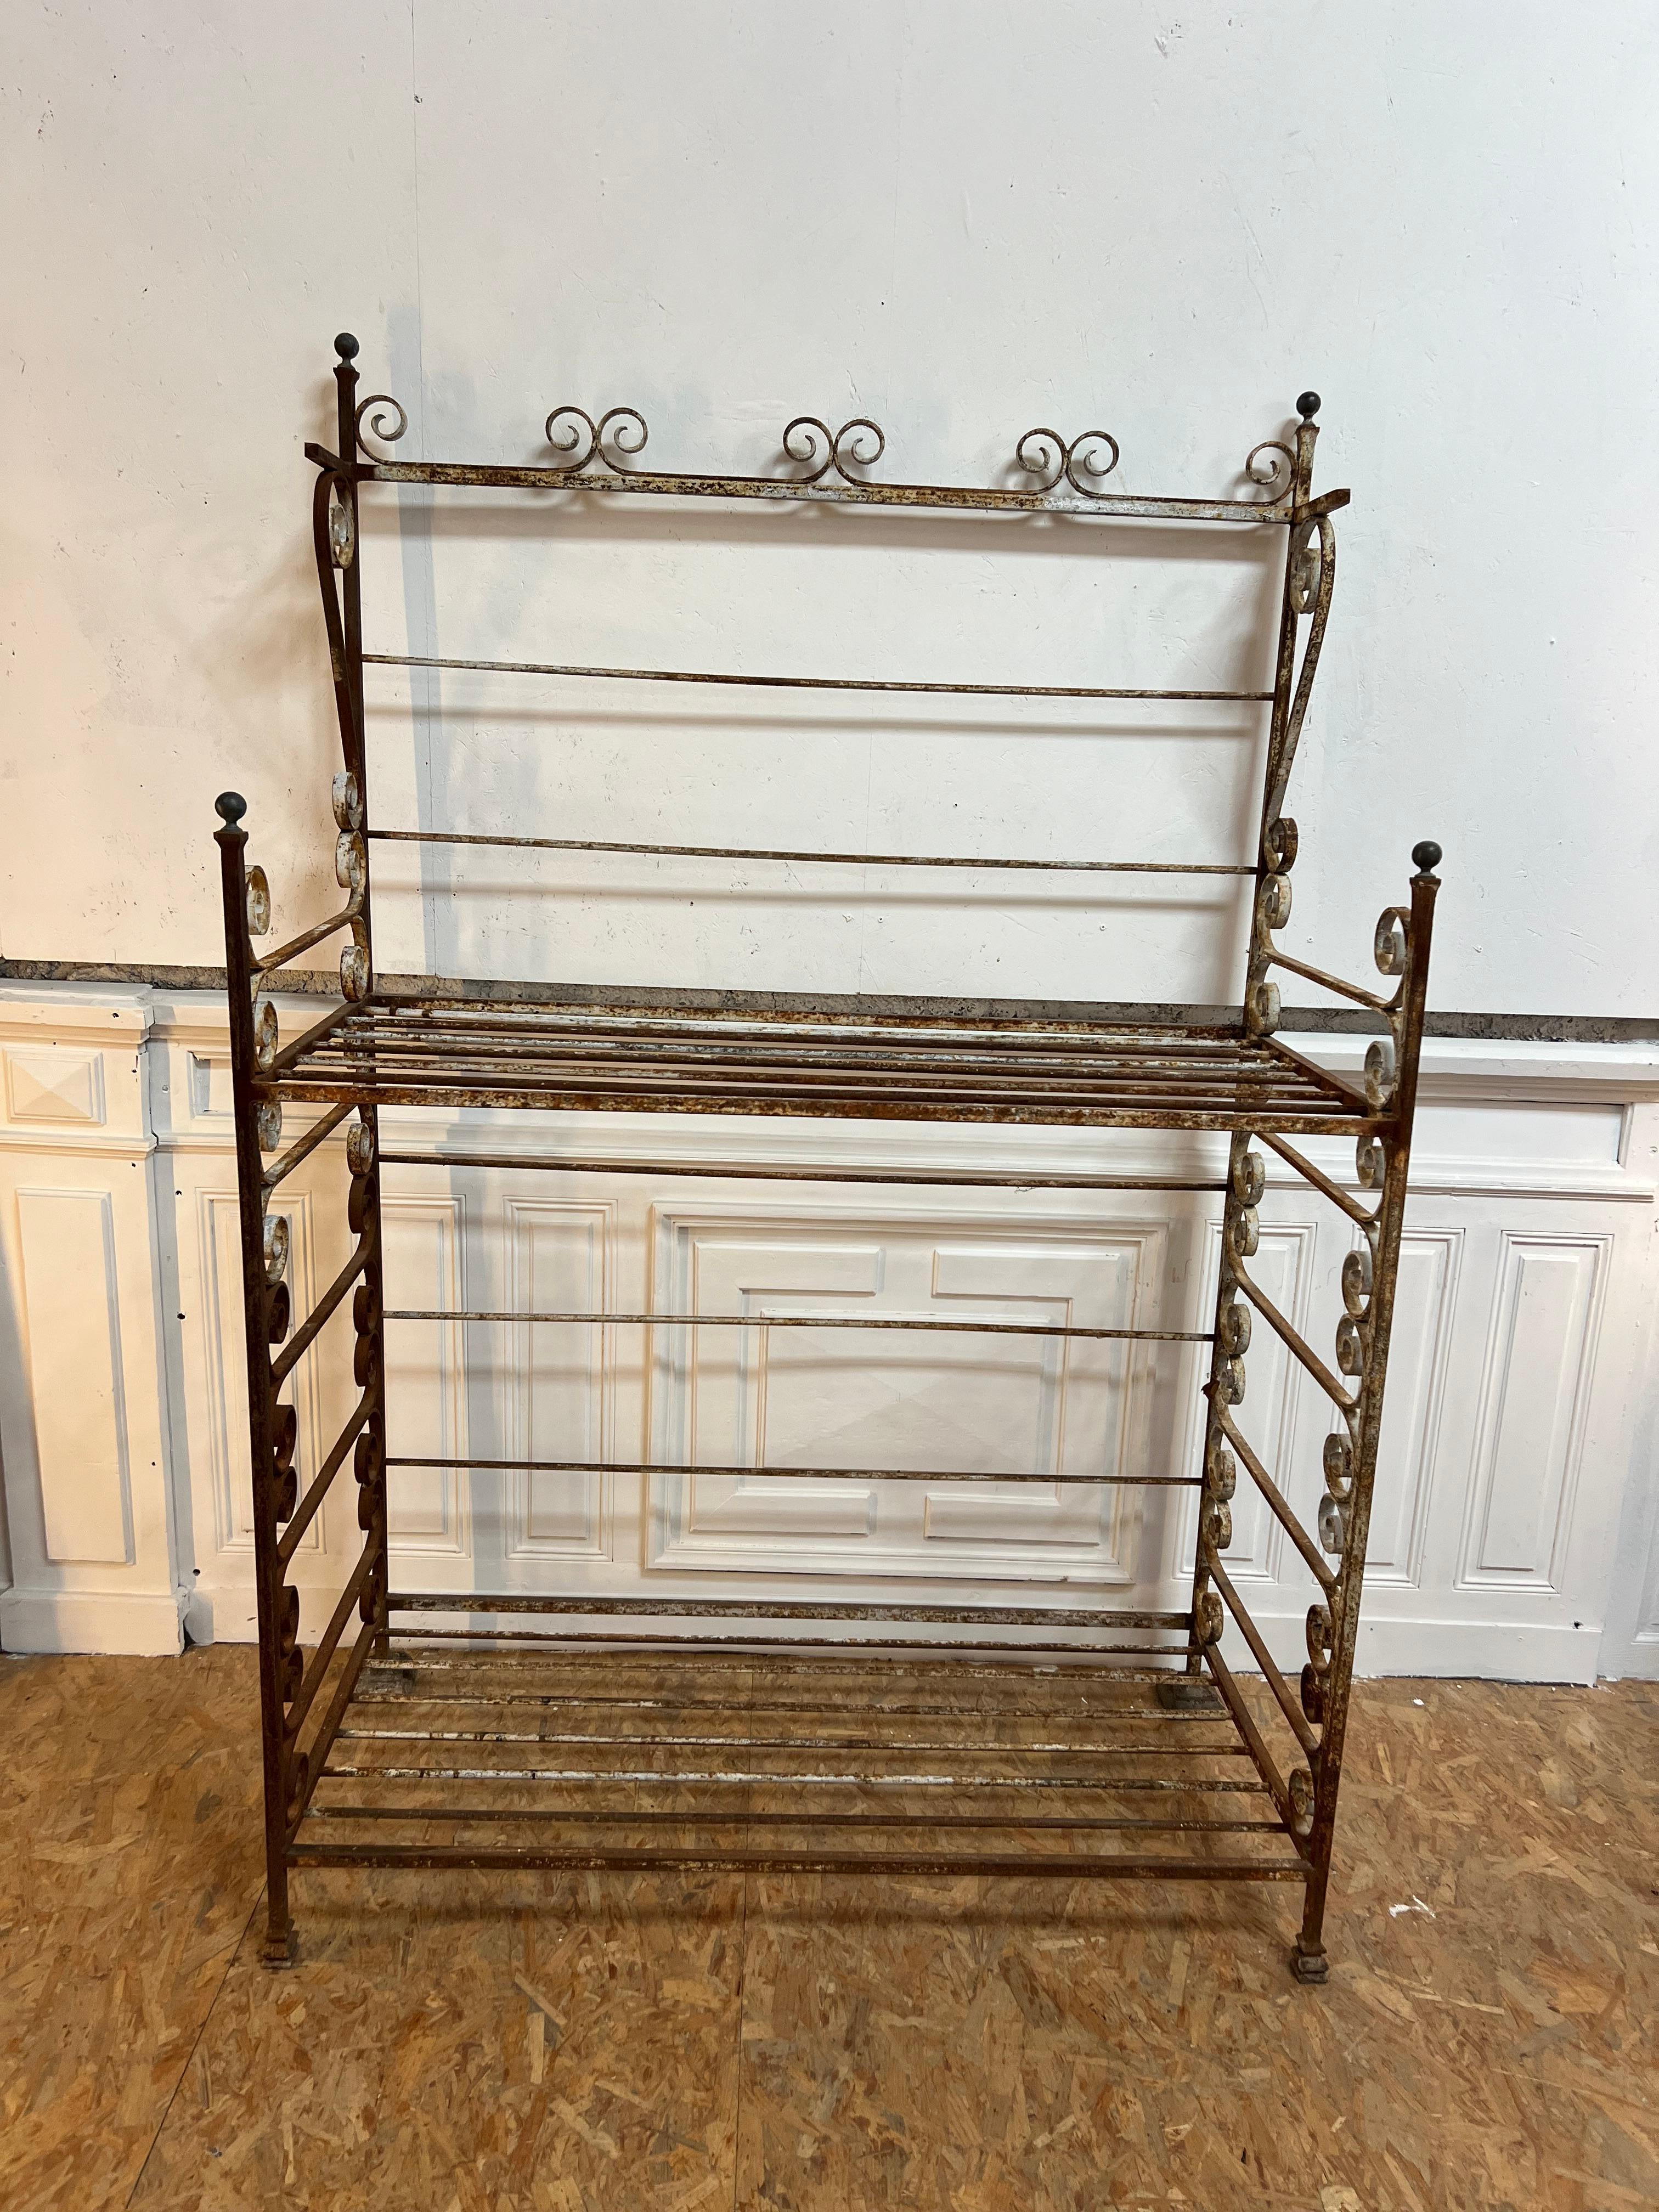 magnificent baker's ladder in metal and brass from the 1880s/1890s
the original white and rust patina gives it one of the prettiest effects
this bakery item was located in a very beautiful and old bakery in Pezenas in Languedoc (south of France)